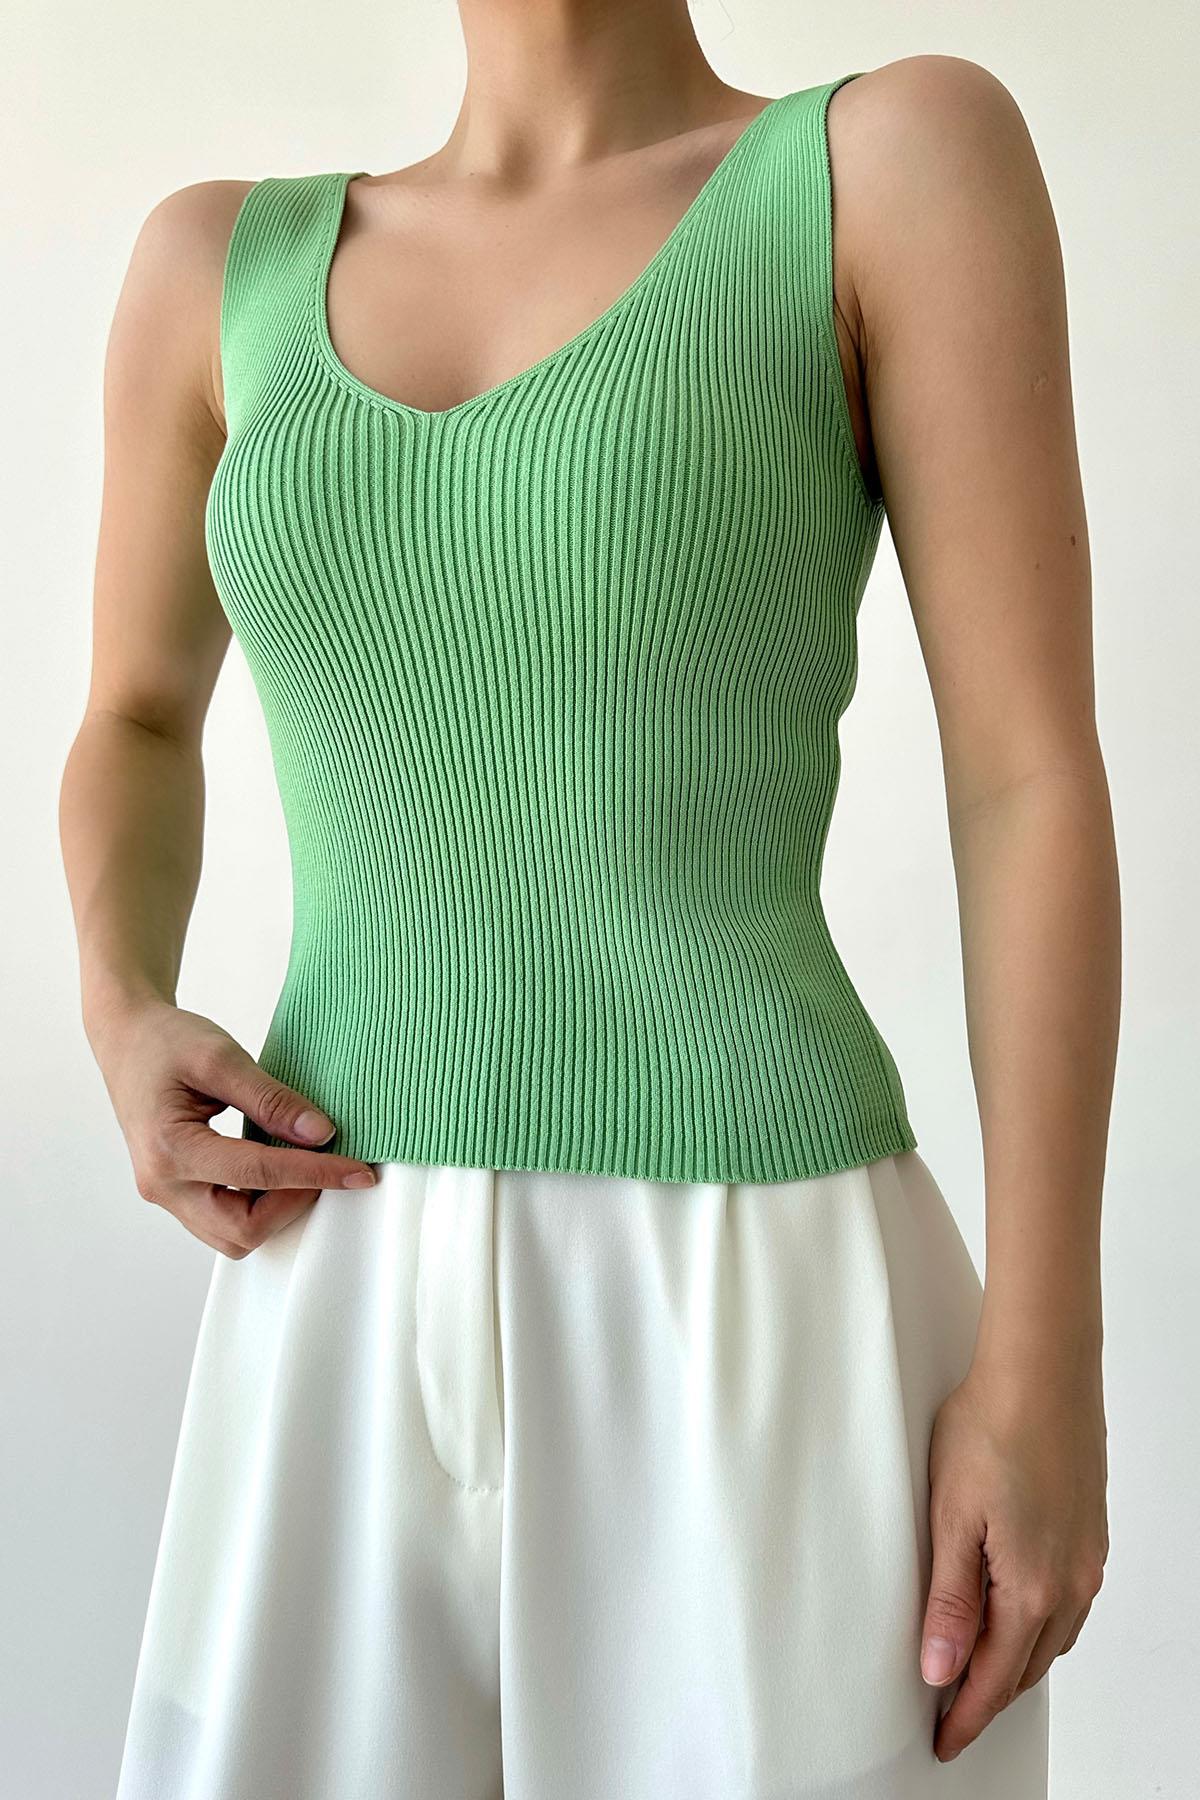 A wholesale clothing model wears V Neck Knitwear Singlet - Light Green, Turkish wholesale Undershirt of Qustyle